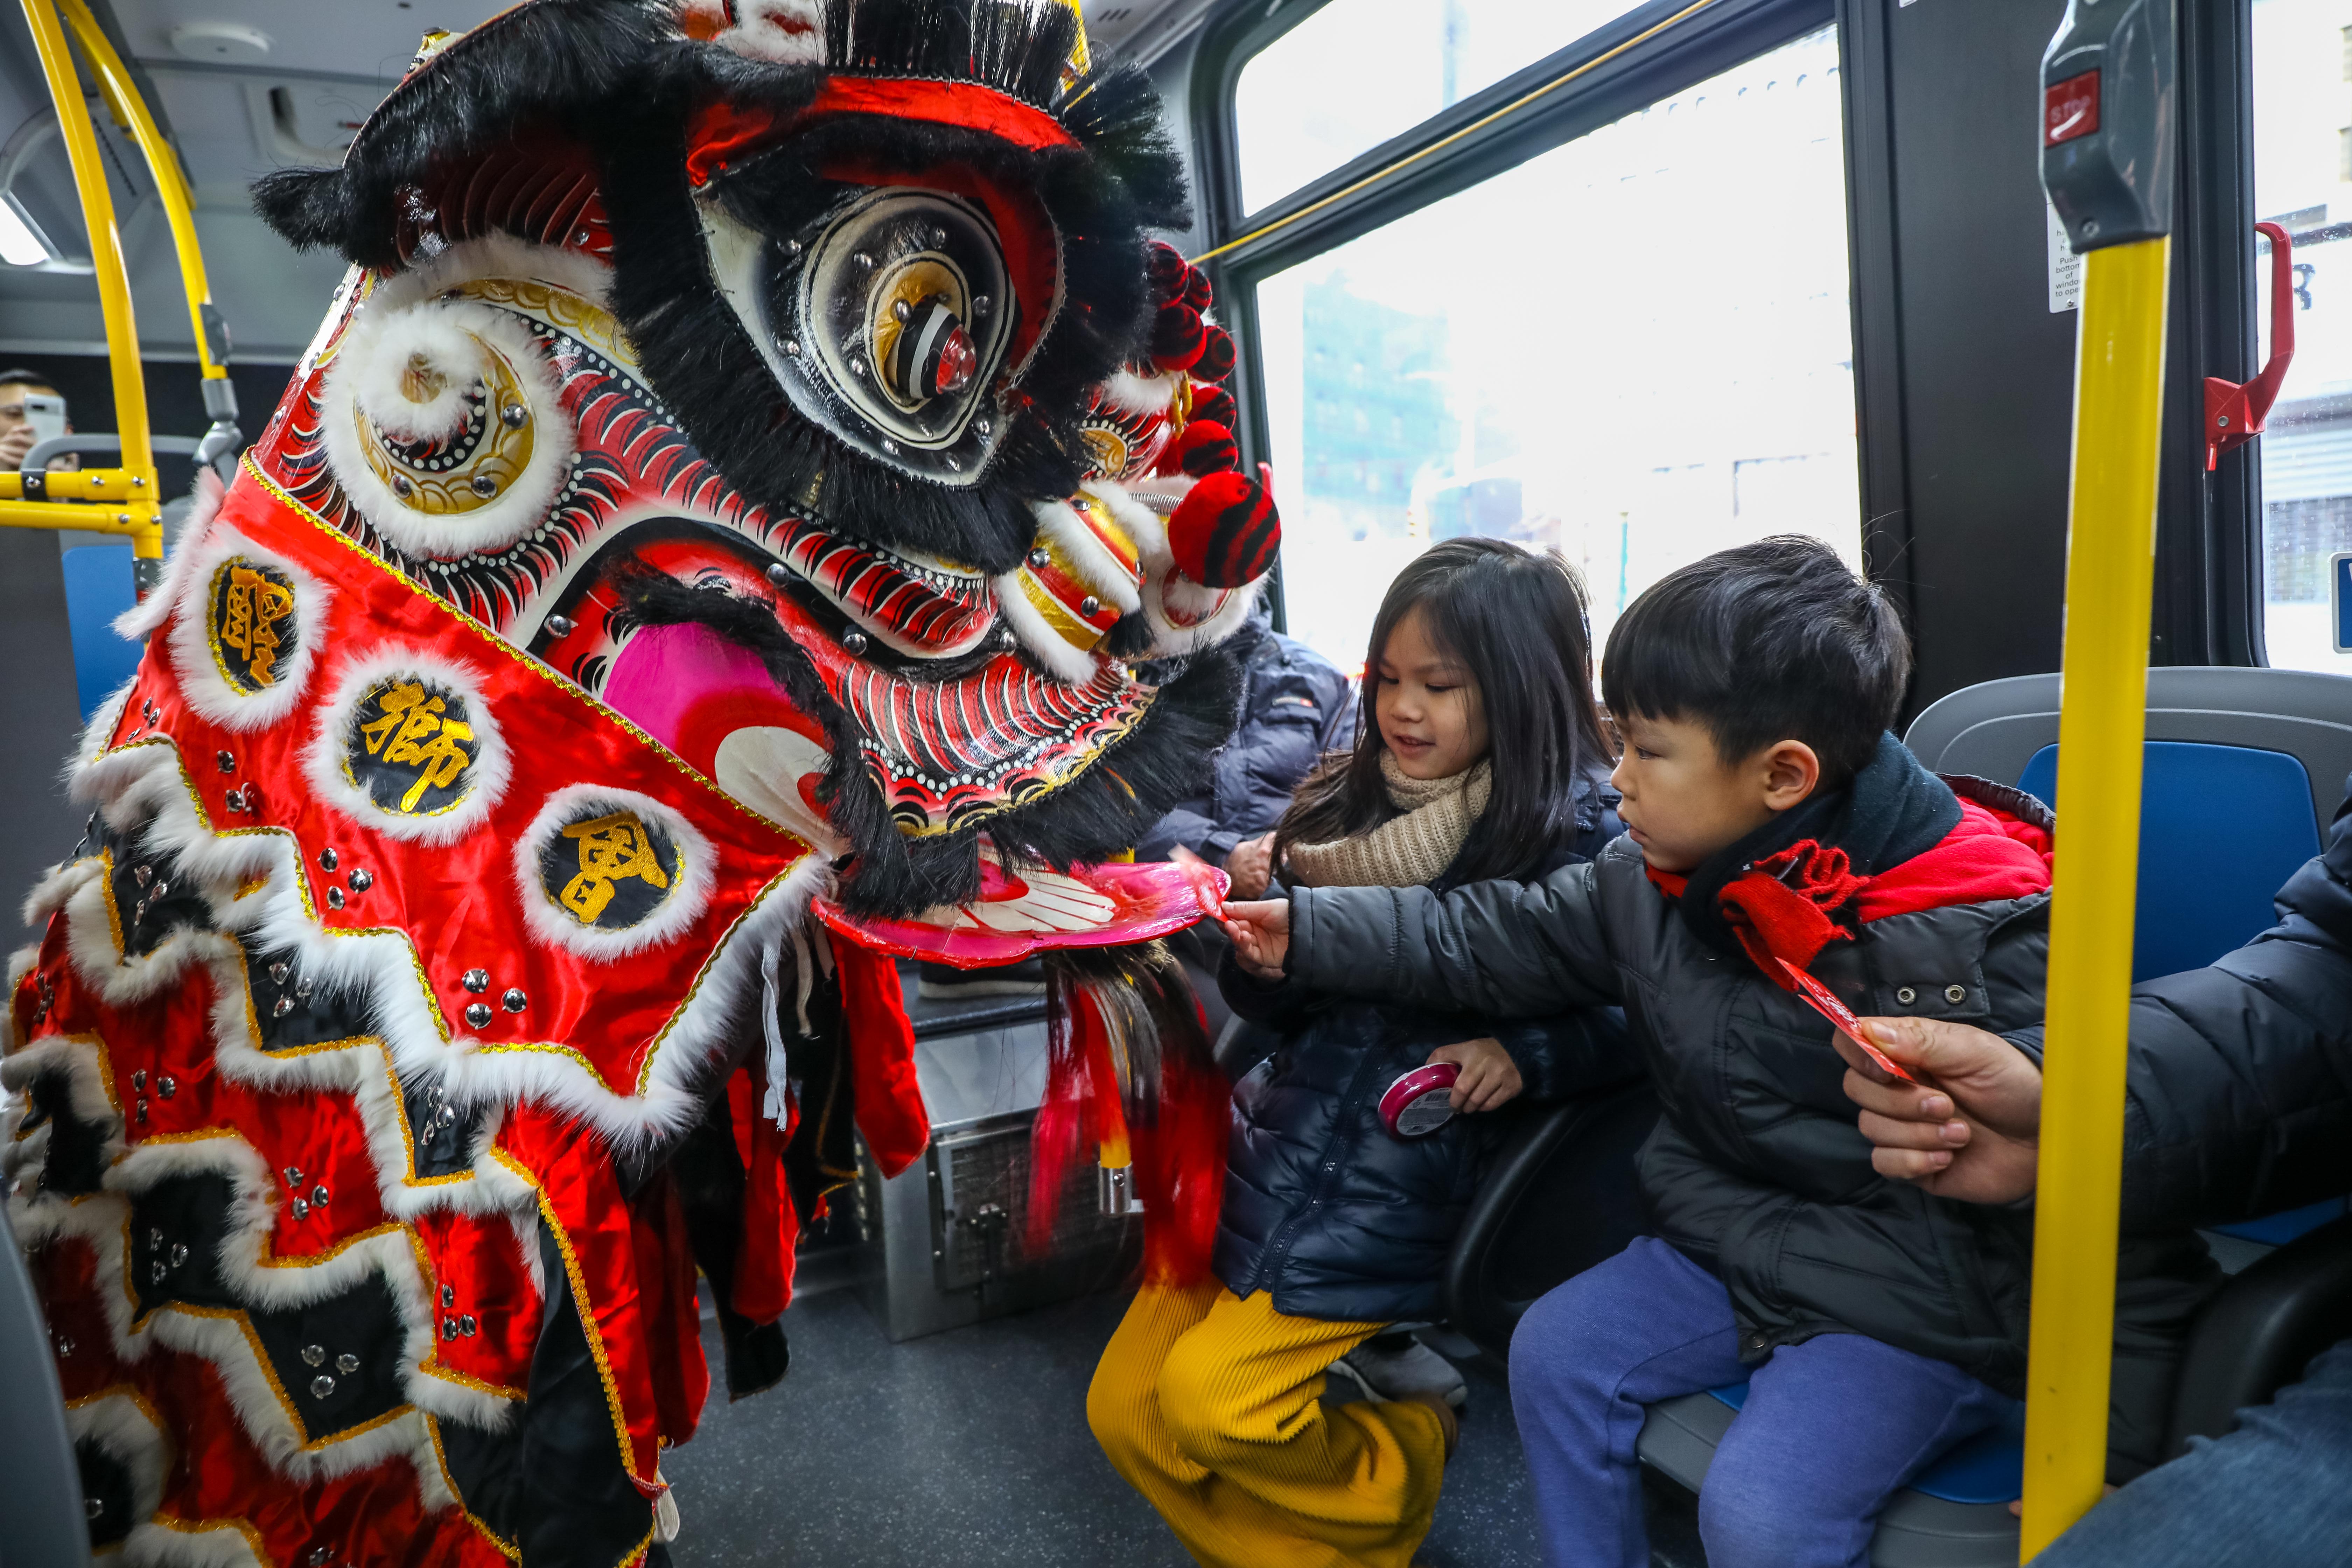 MTA celebrates Lunar New Year with dragon dancers and OMNY card giveaway